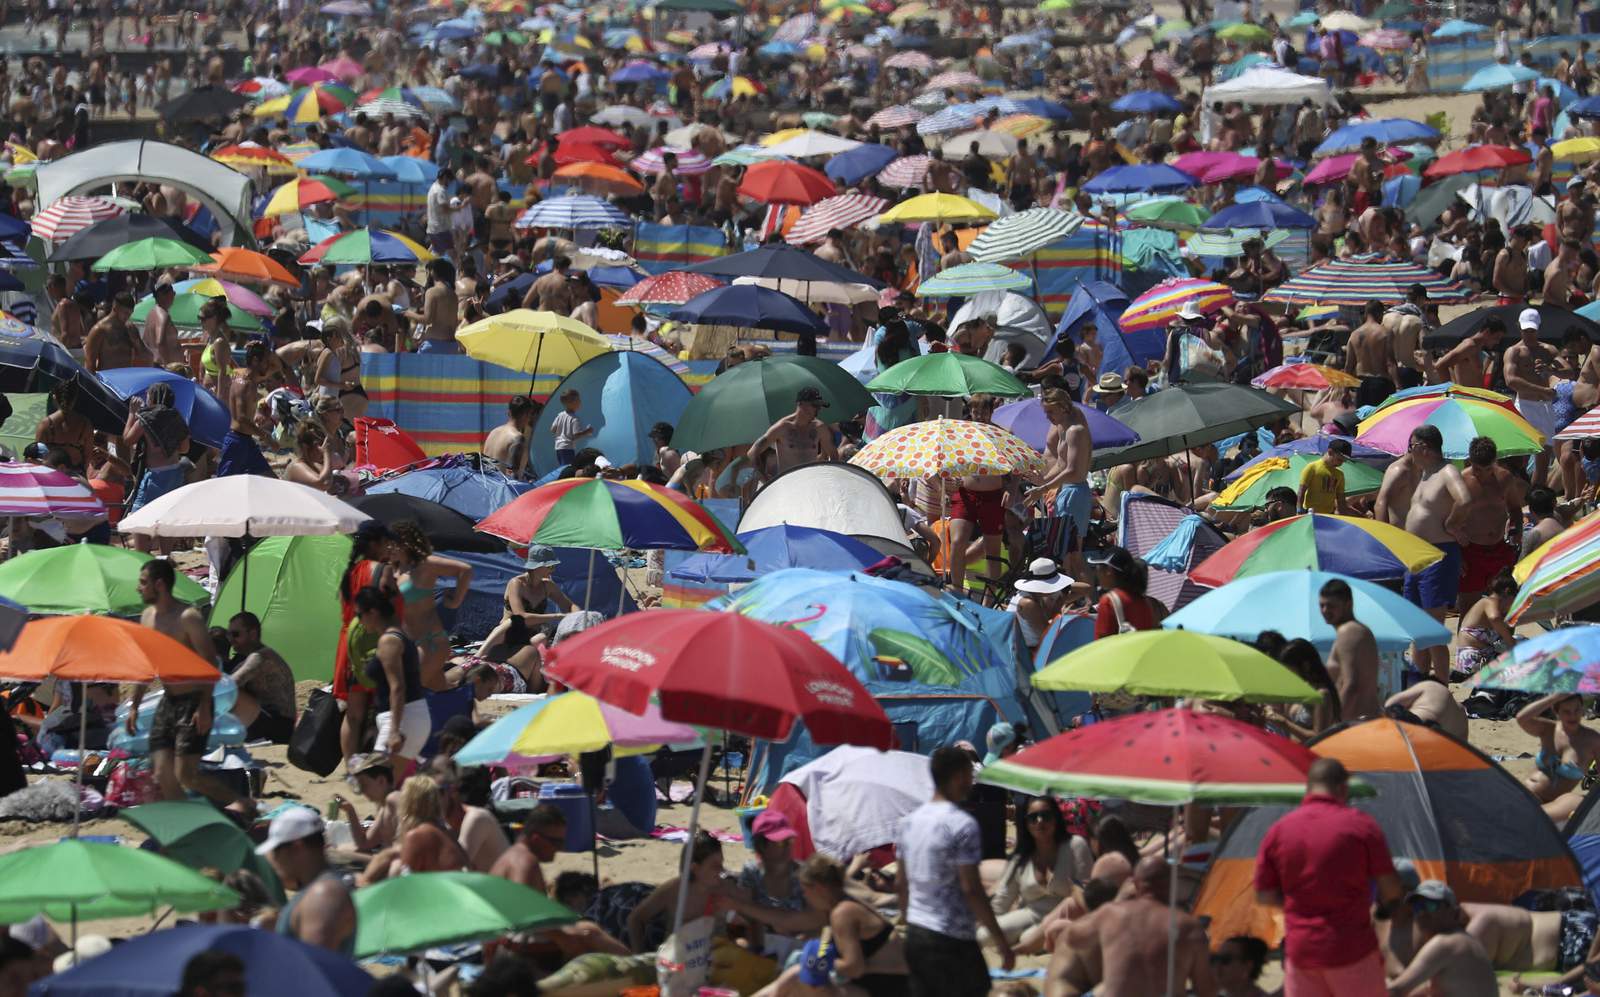 On hottest day of year, thousands cram onto English beaches